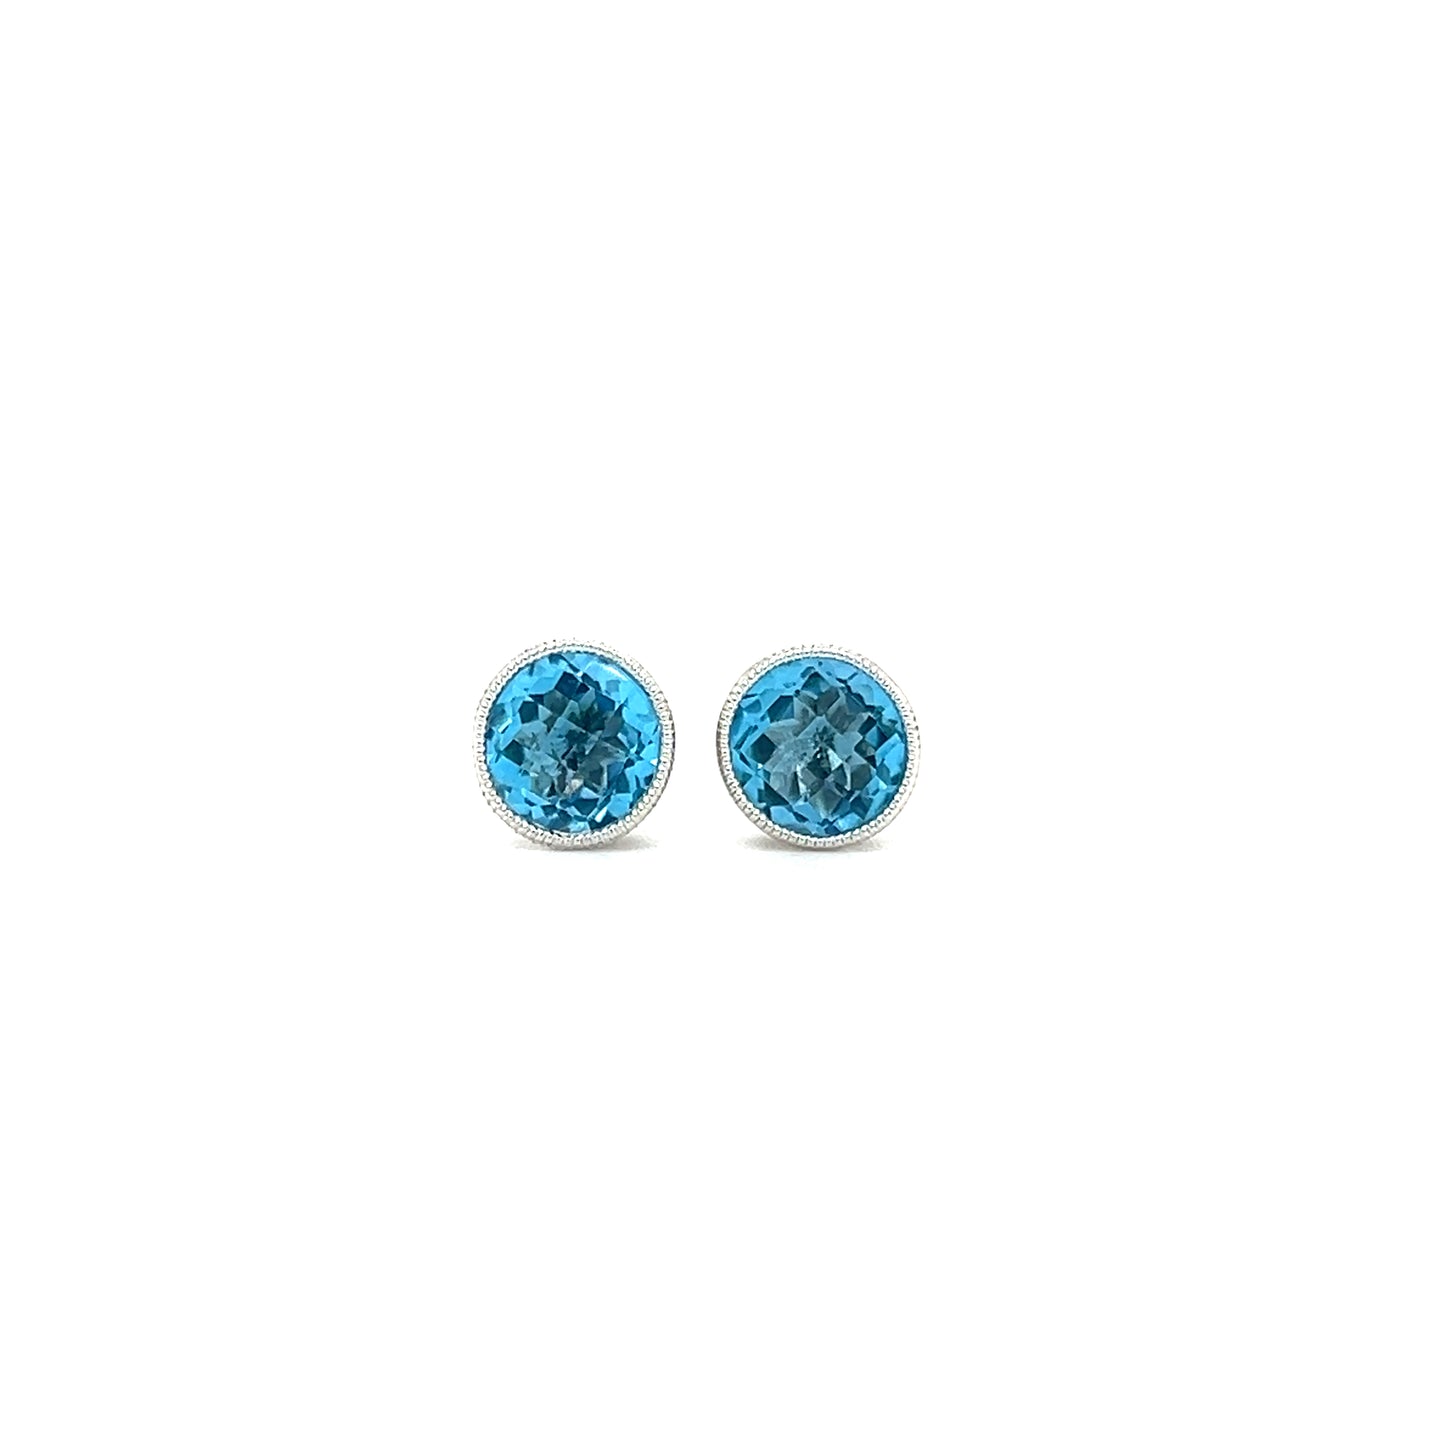 Blue Topaz Stud Earrings with Filigree and Milgrain Details in 14K White Gold Front View